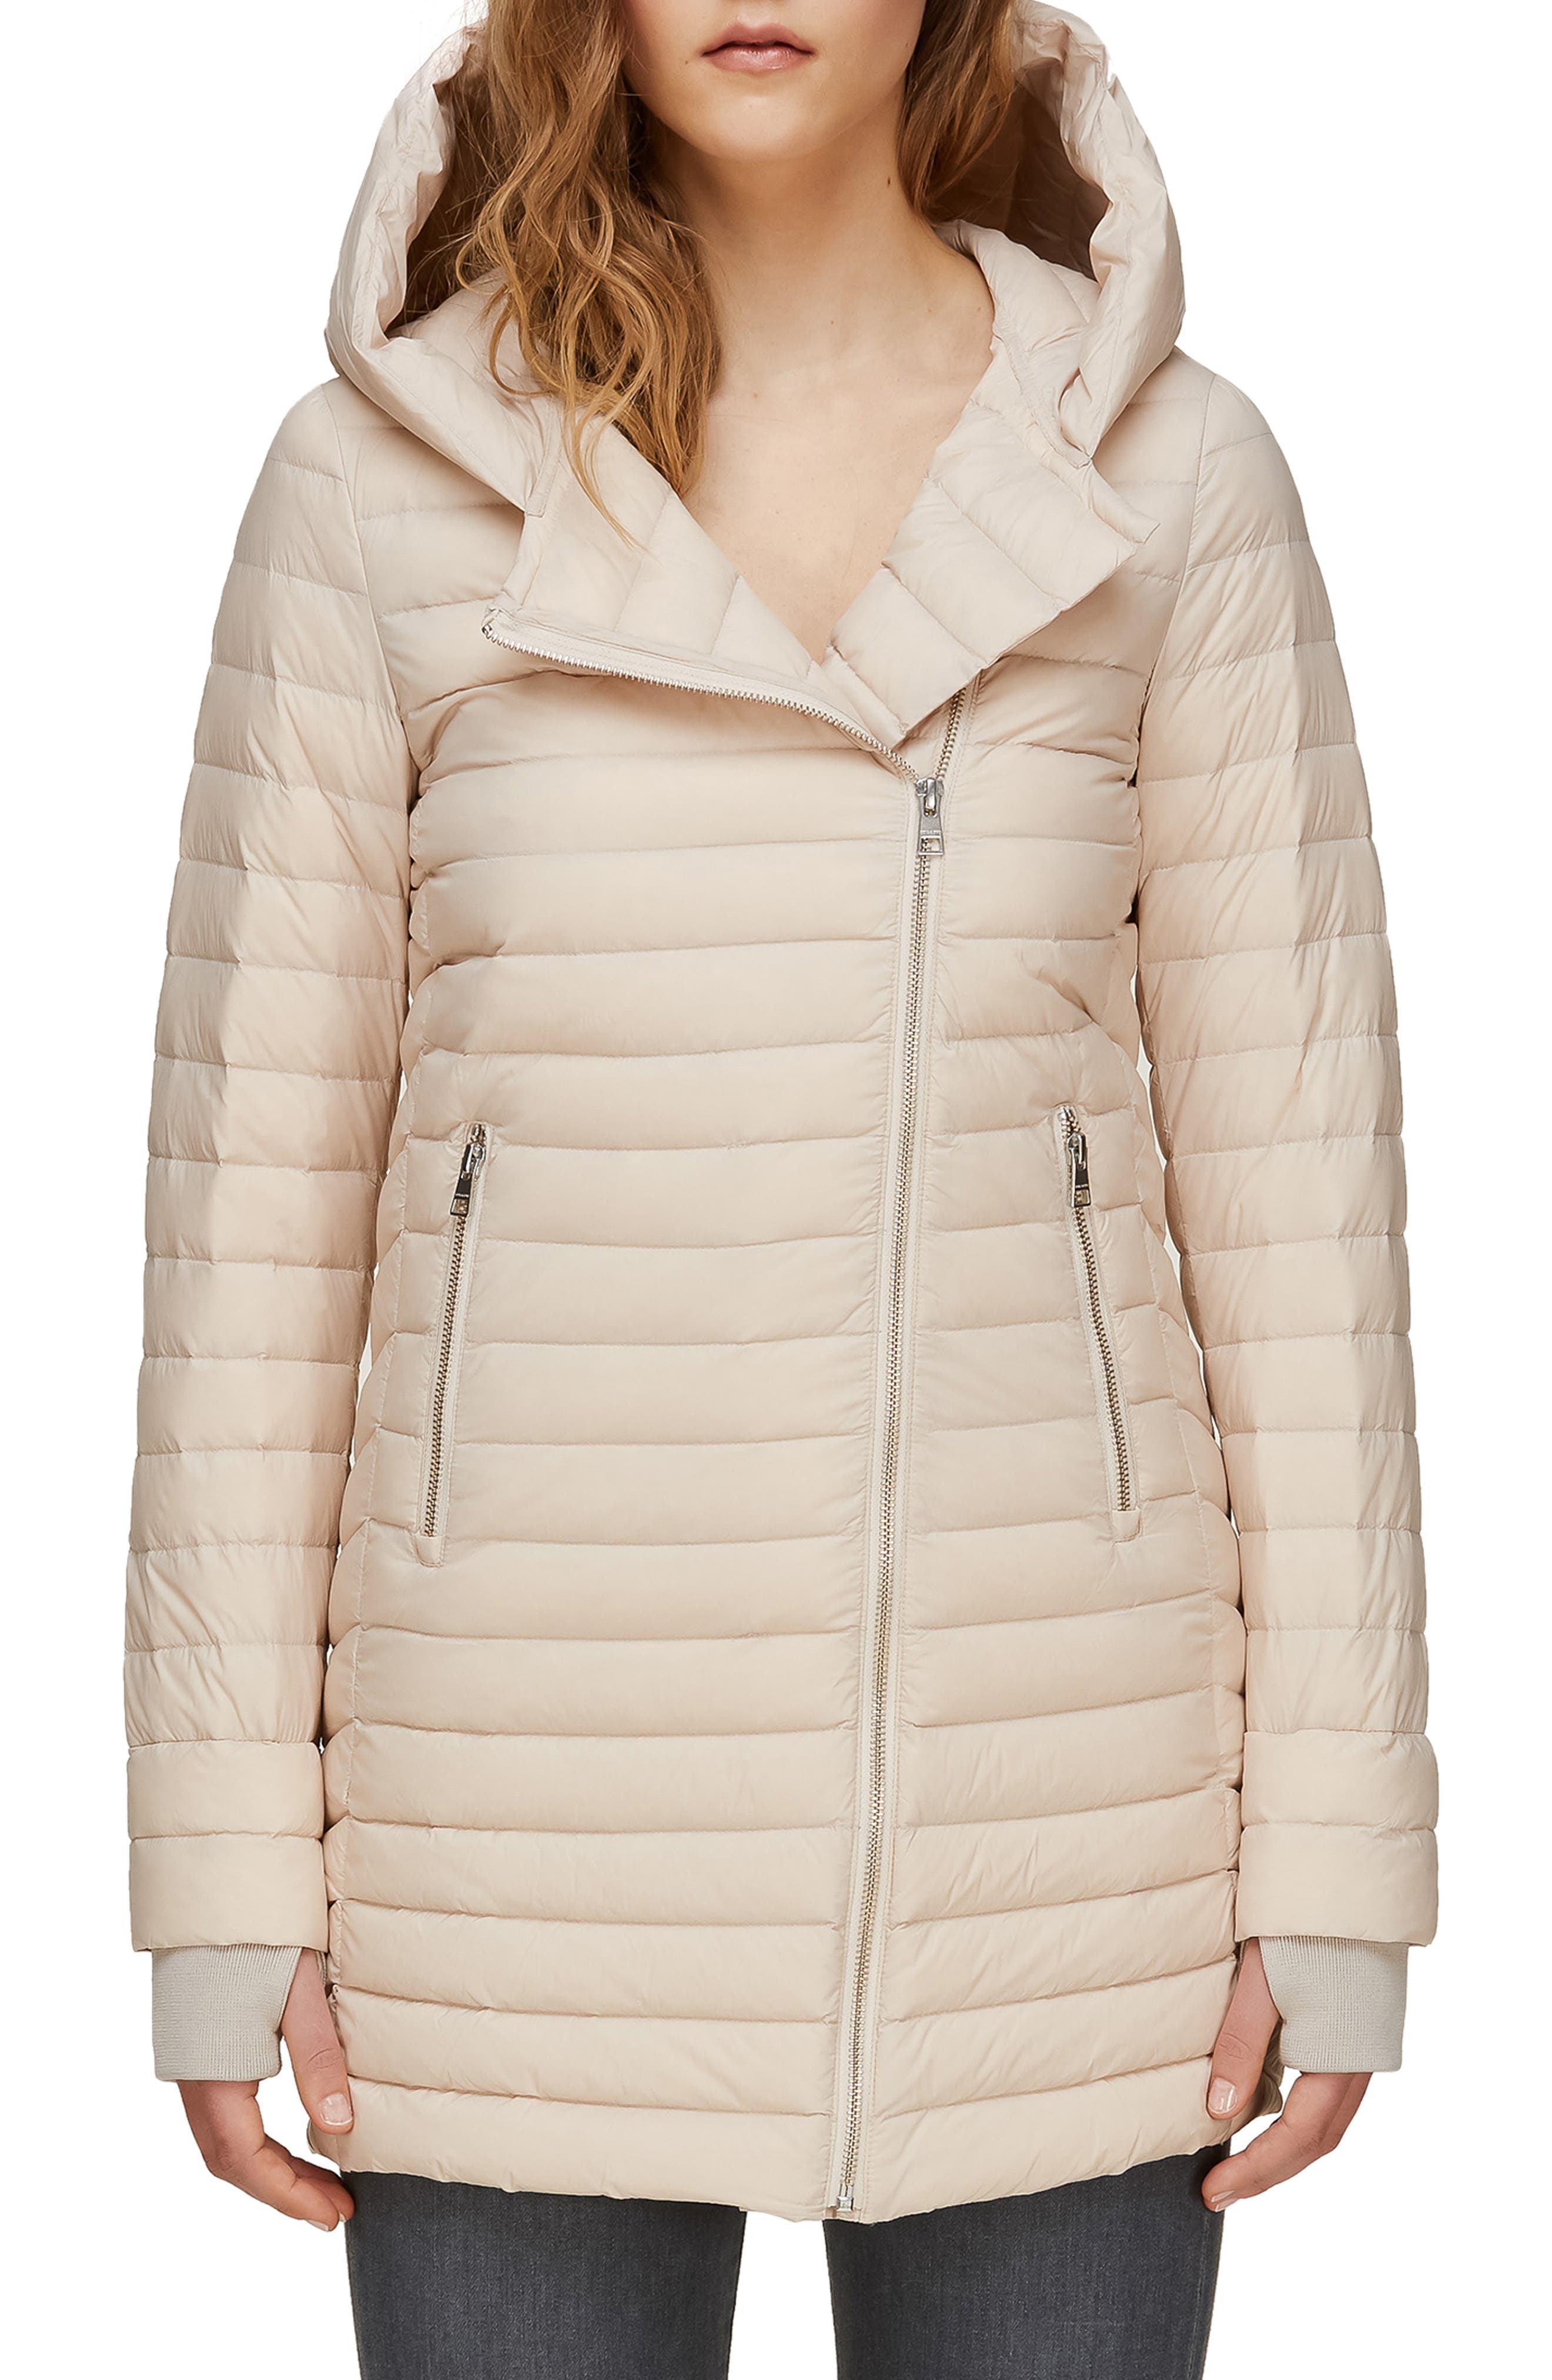 soia & kyo hooded down puffer jacket